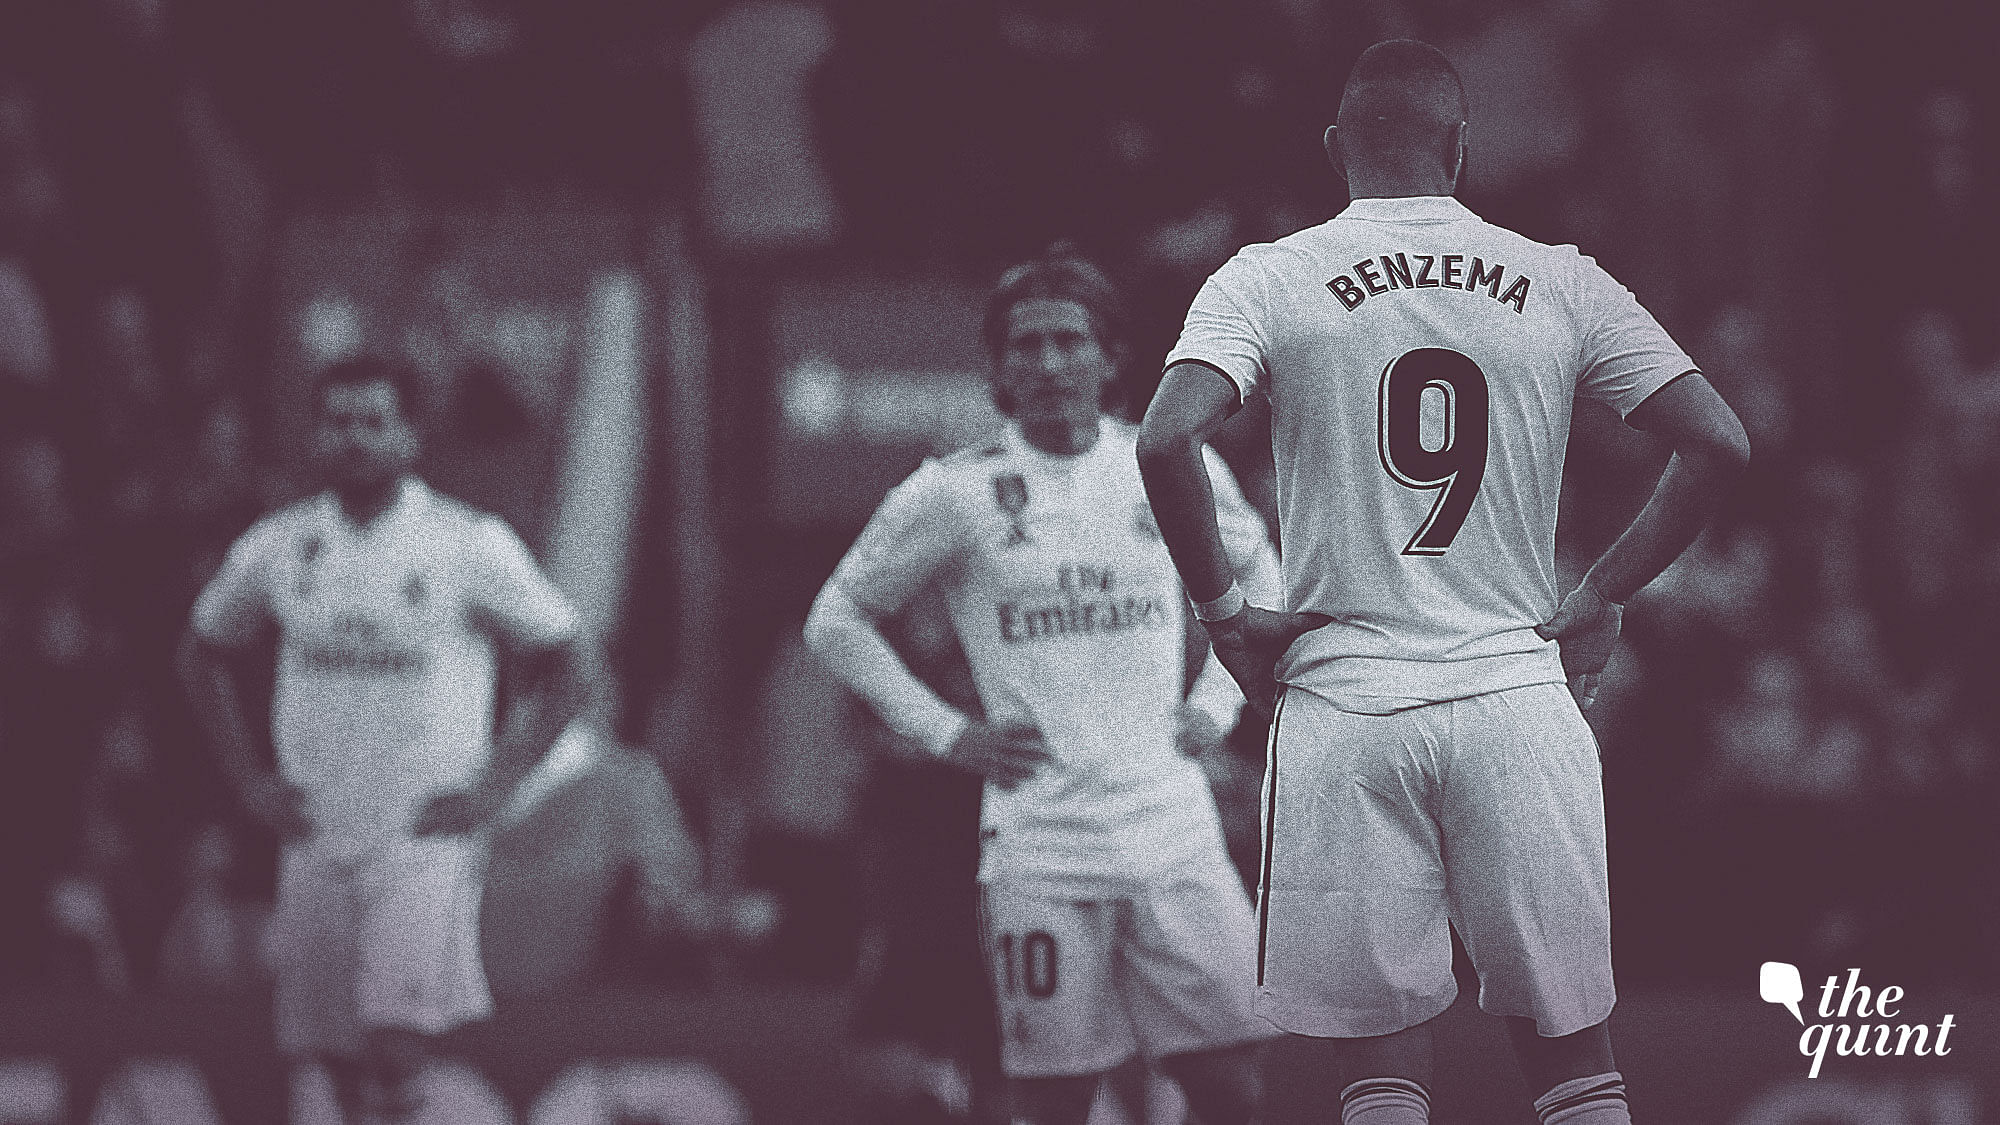 For the first time in this century, Madrid has failed to score a goal in five straight games.